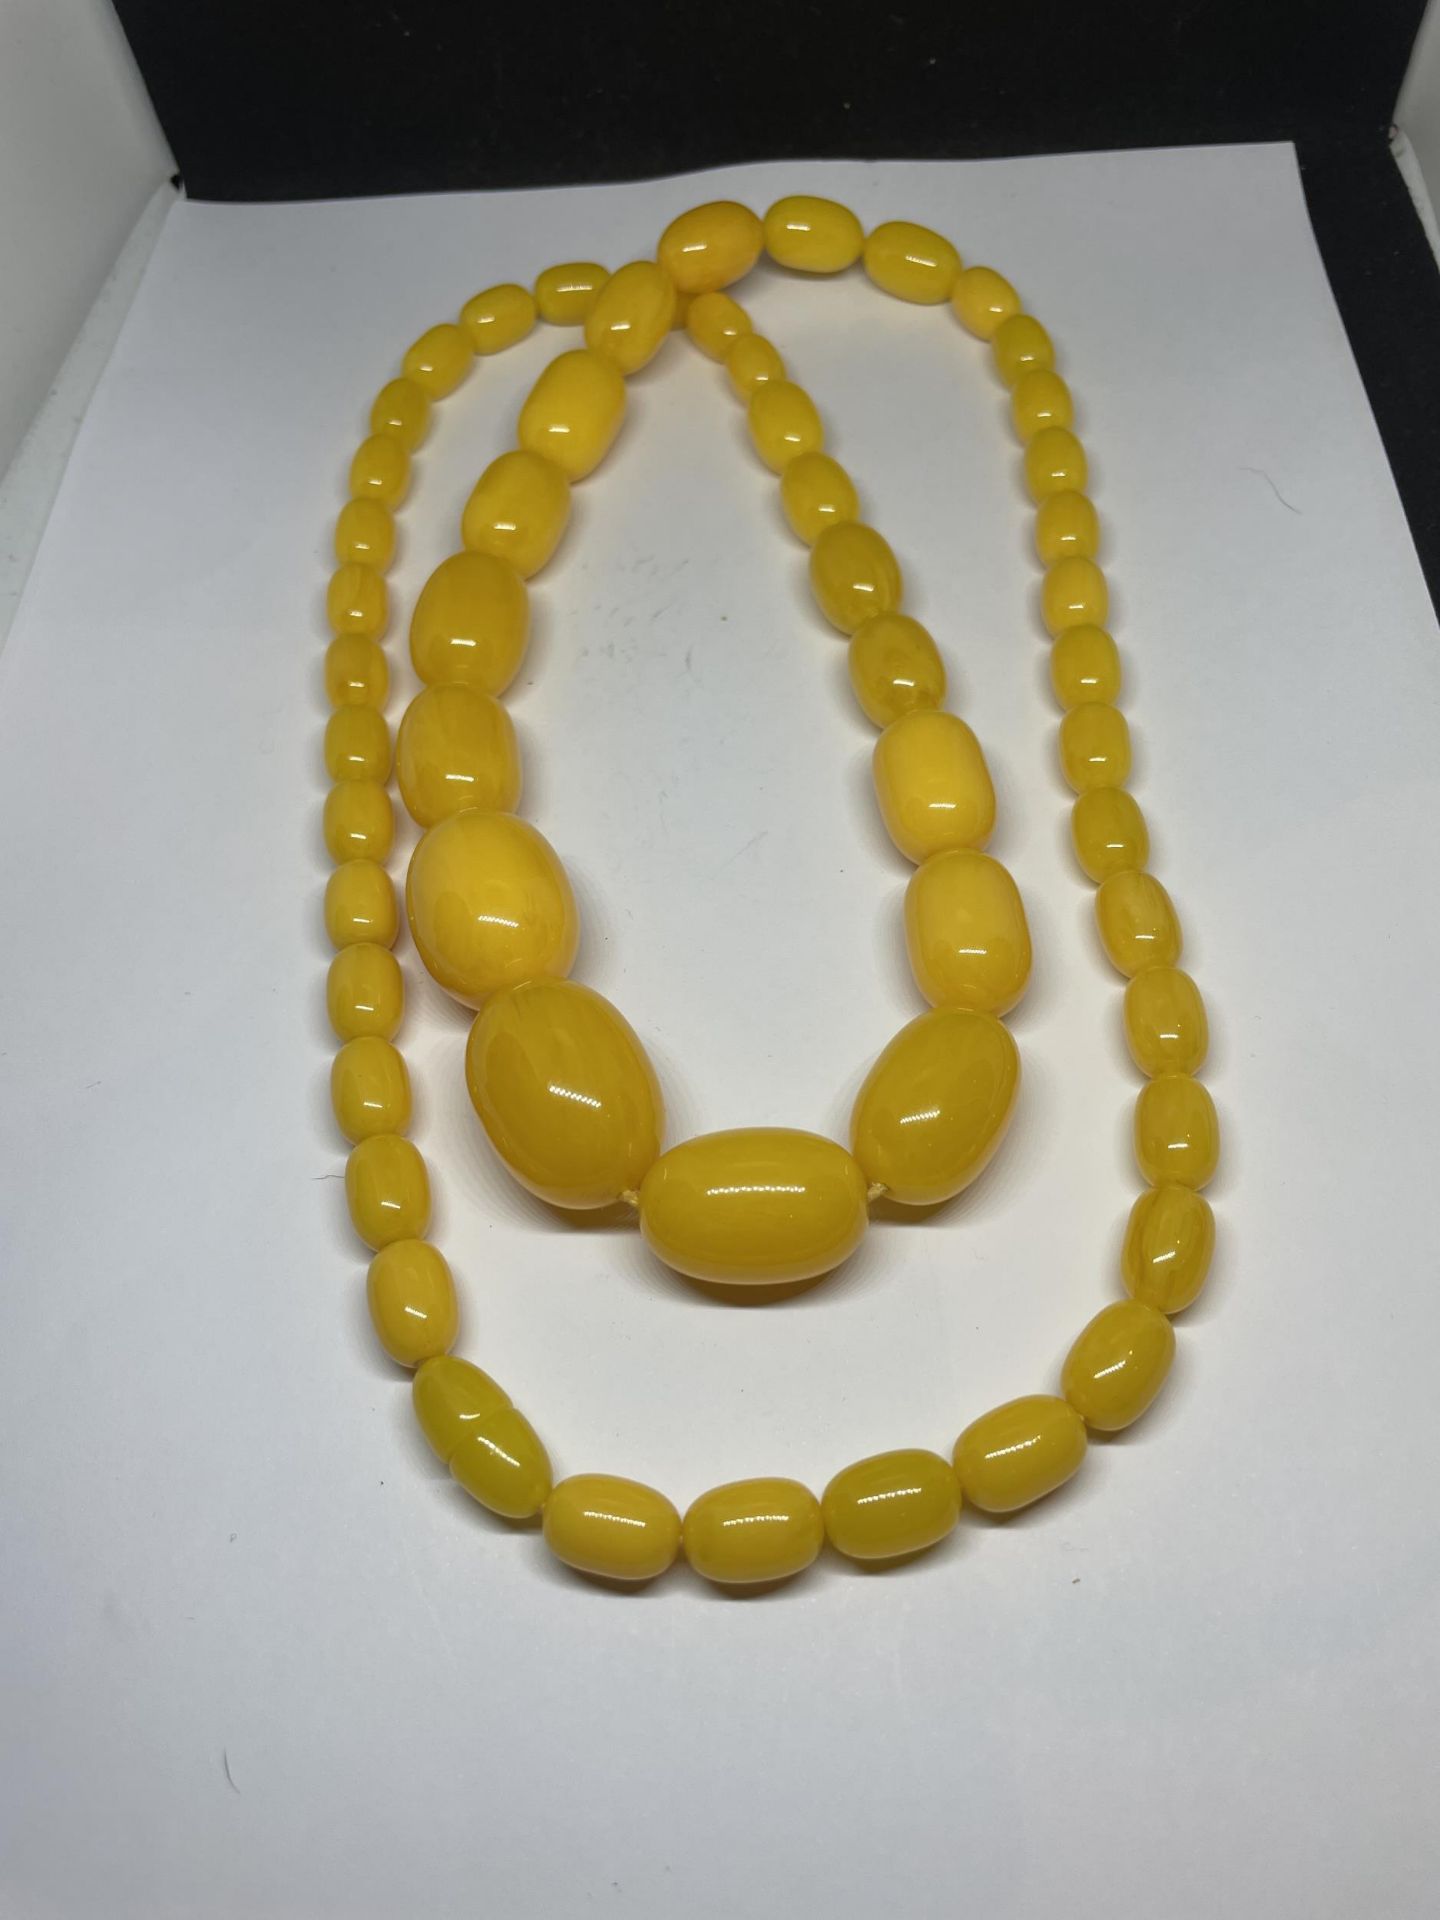 A BELIEVED BUTTERSCOTCH AMBER NECKLACE WITH DISCREET SCREW CLASP LENGTH 95CM